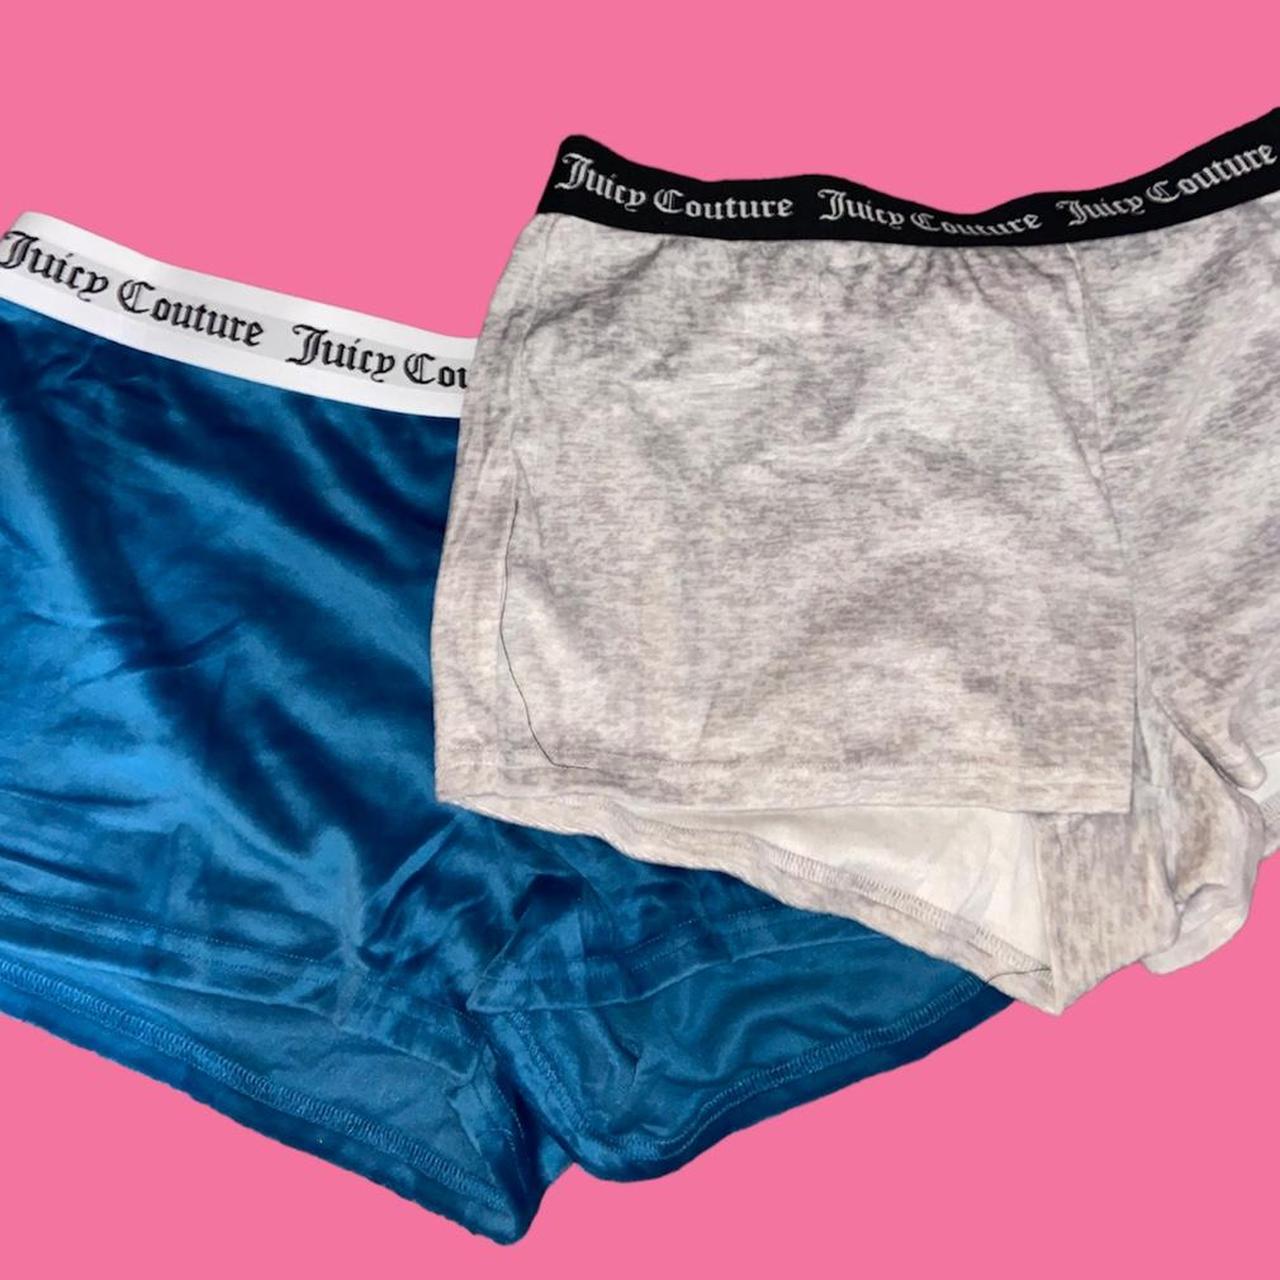 Juicy Couture Women's Grey and Blue Shorts (3)